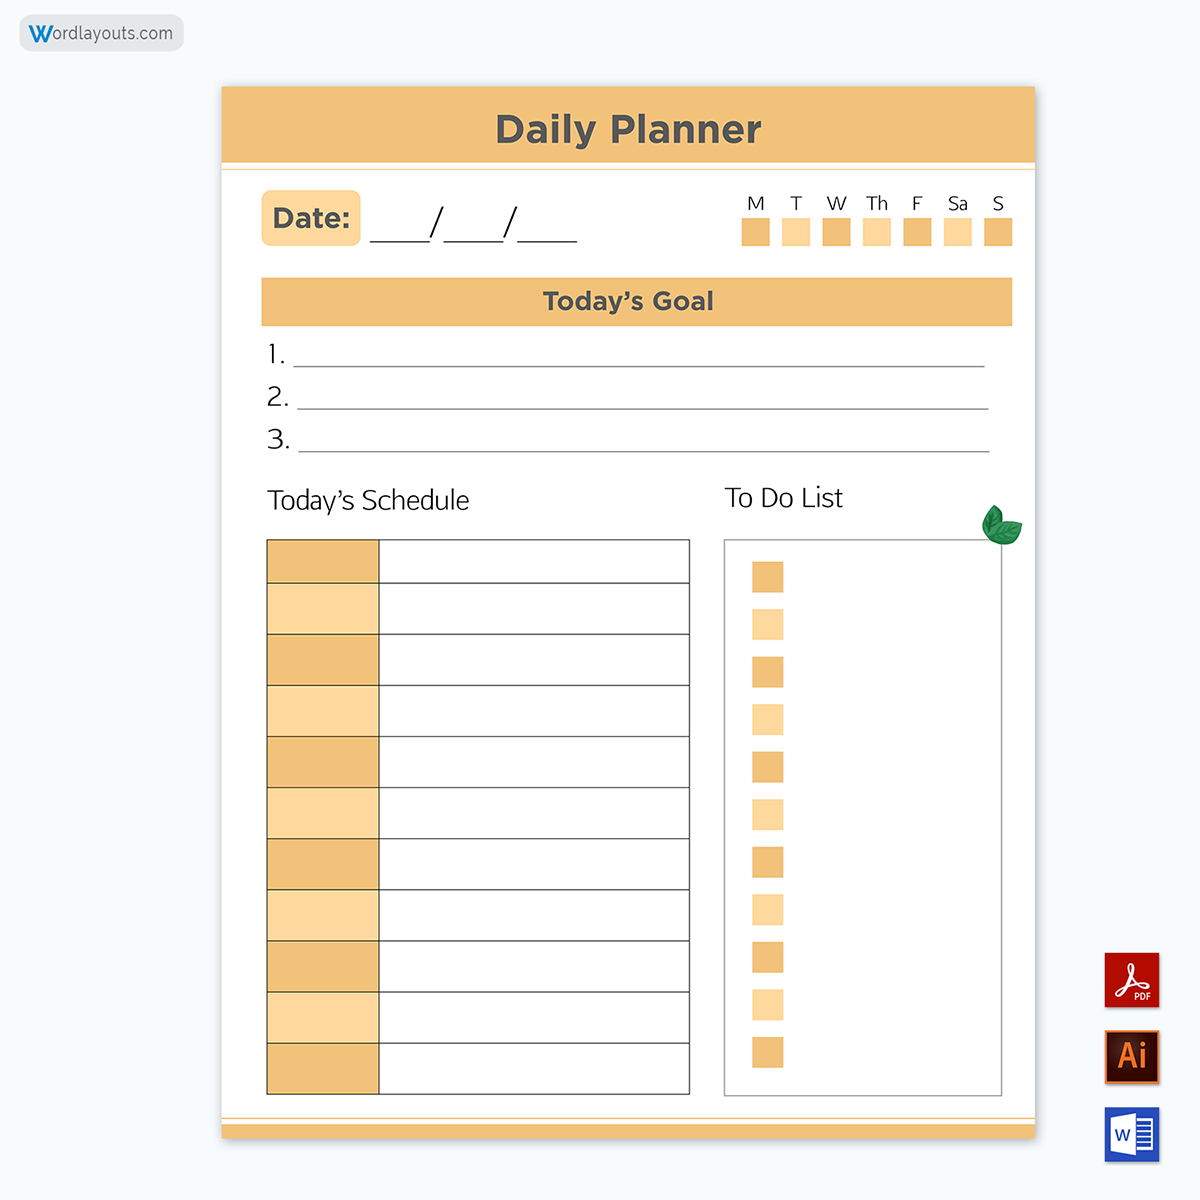 Daily-Planner-Template-8669ndnjp-06-23-p12